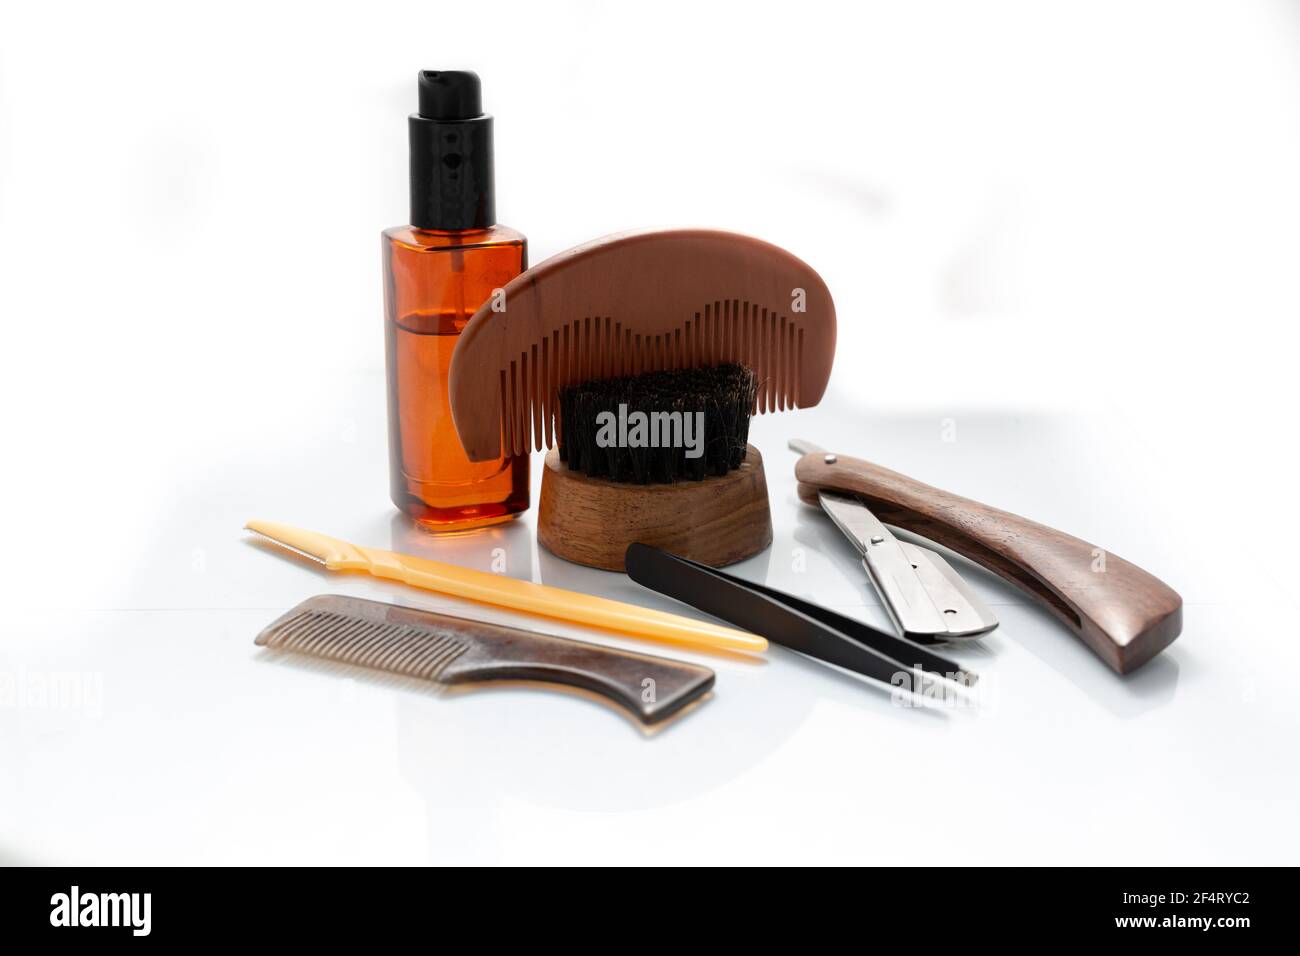 A selection of men's beard grooming products that include oil, cut throat razor and a brush, shot against a clean white background Stock Photo